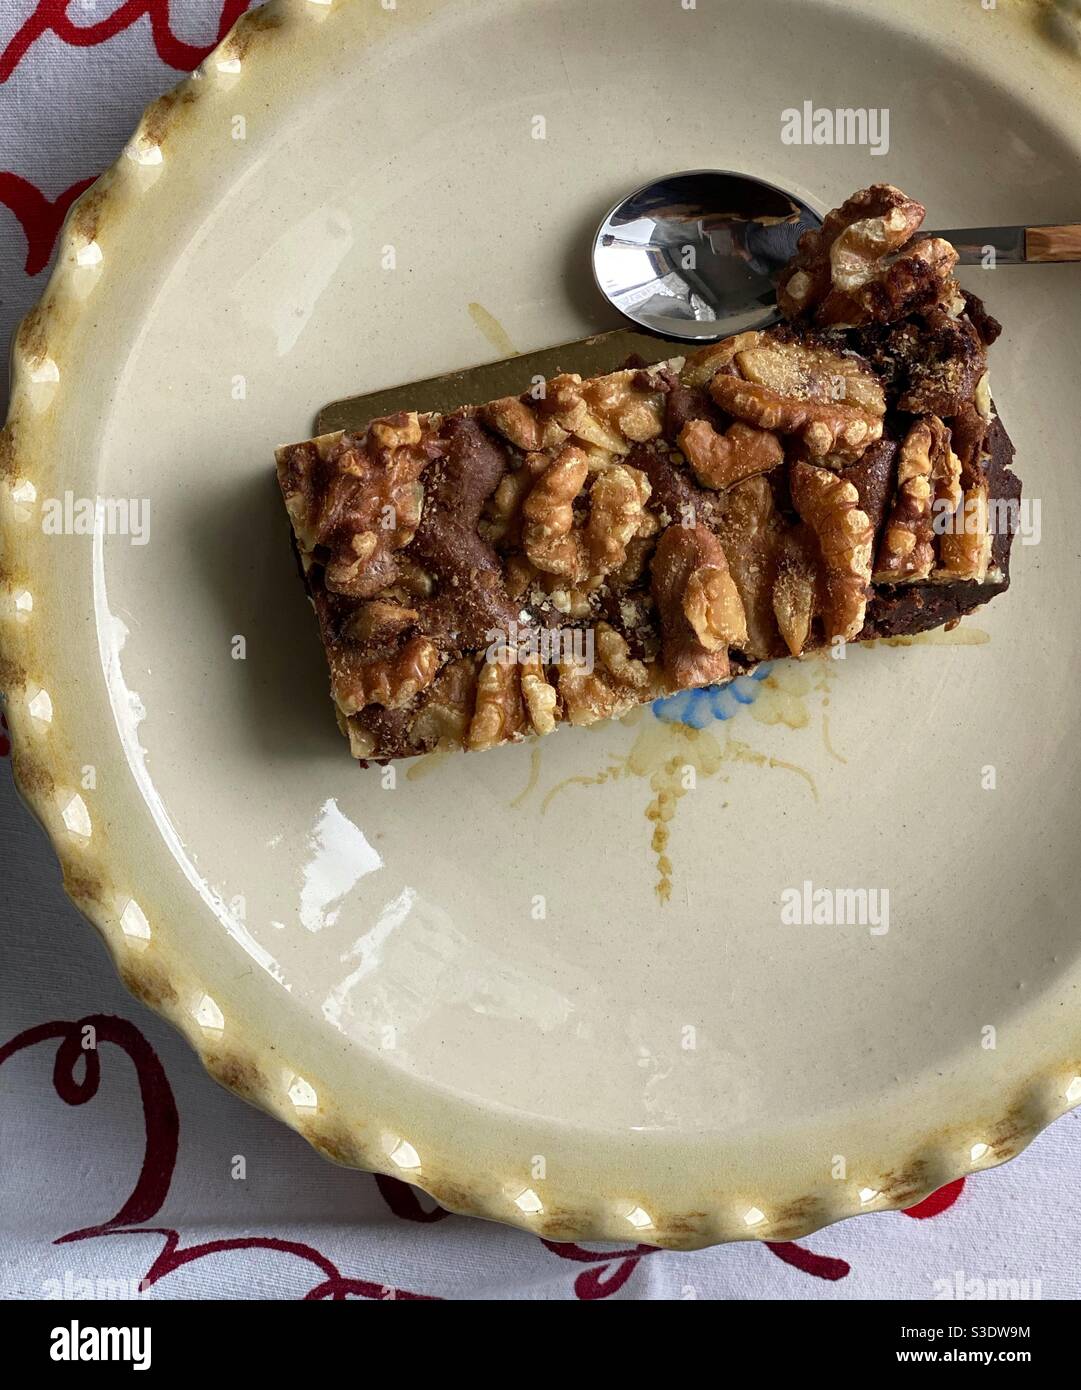 Brownie with walnuts on a vintage plate Stock Photo